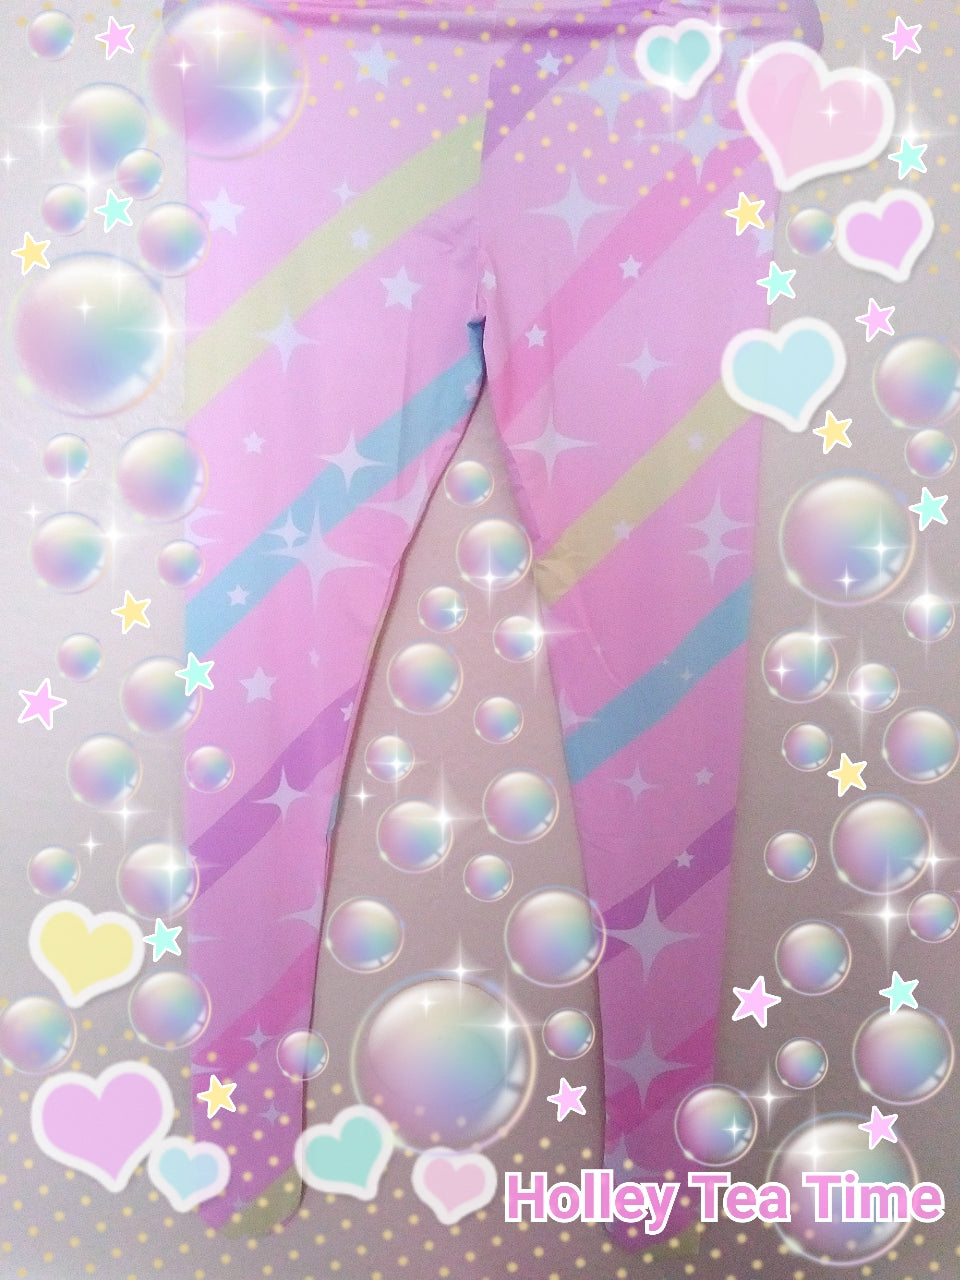 Sparkle Stars Pink Tights [made to order]